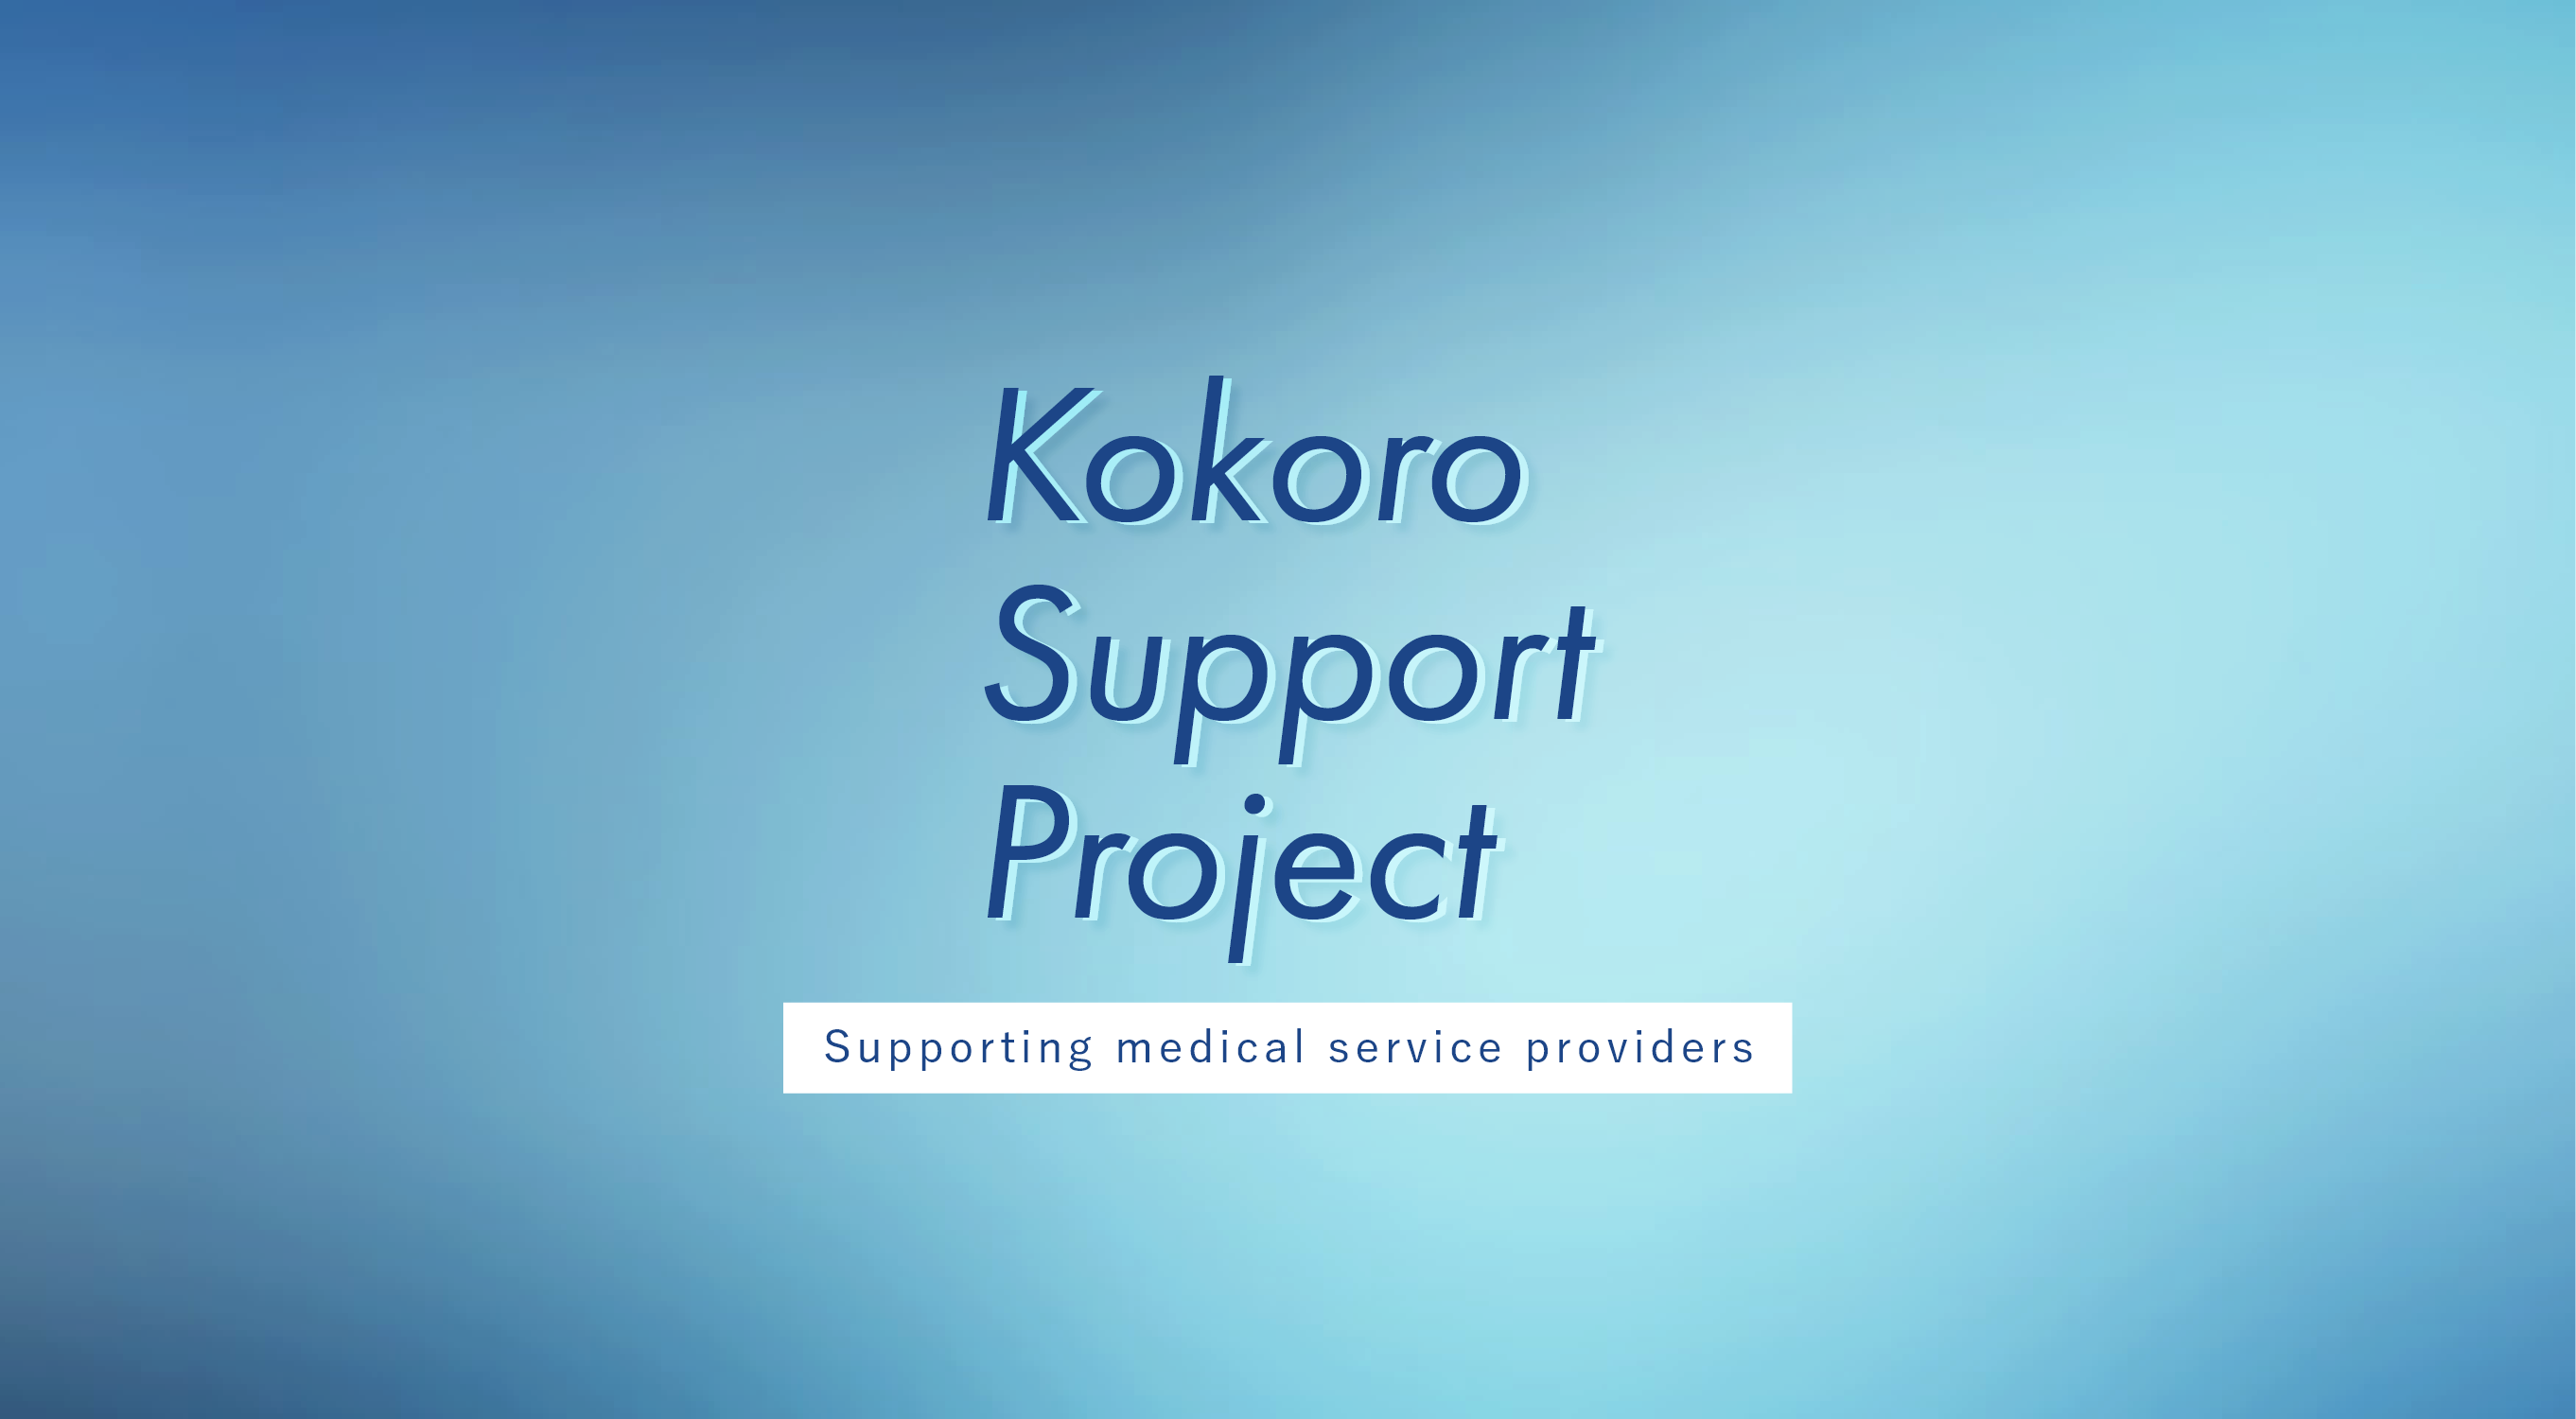 kokoro support project　Supporting medical service providers